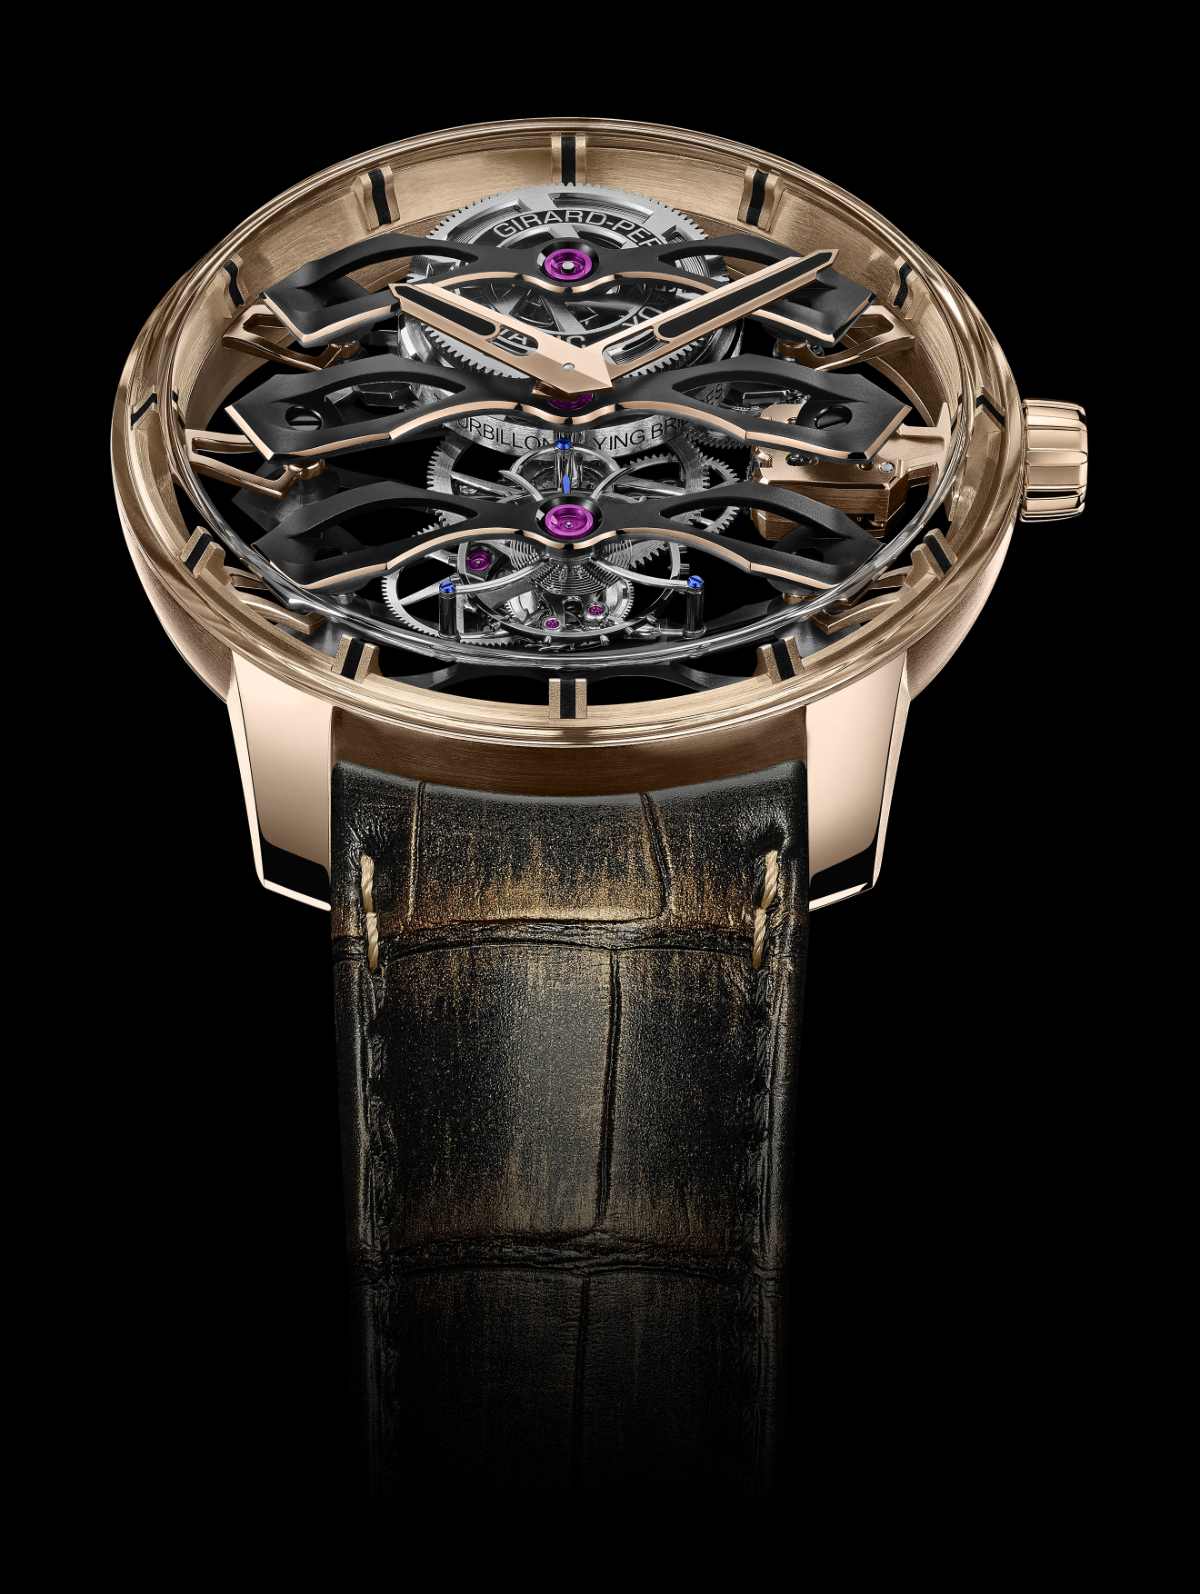 The Tourbillon with Three Flying Bridges is endowed with three Neo Bridges formed of pink gold, the